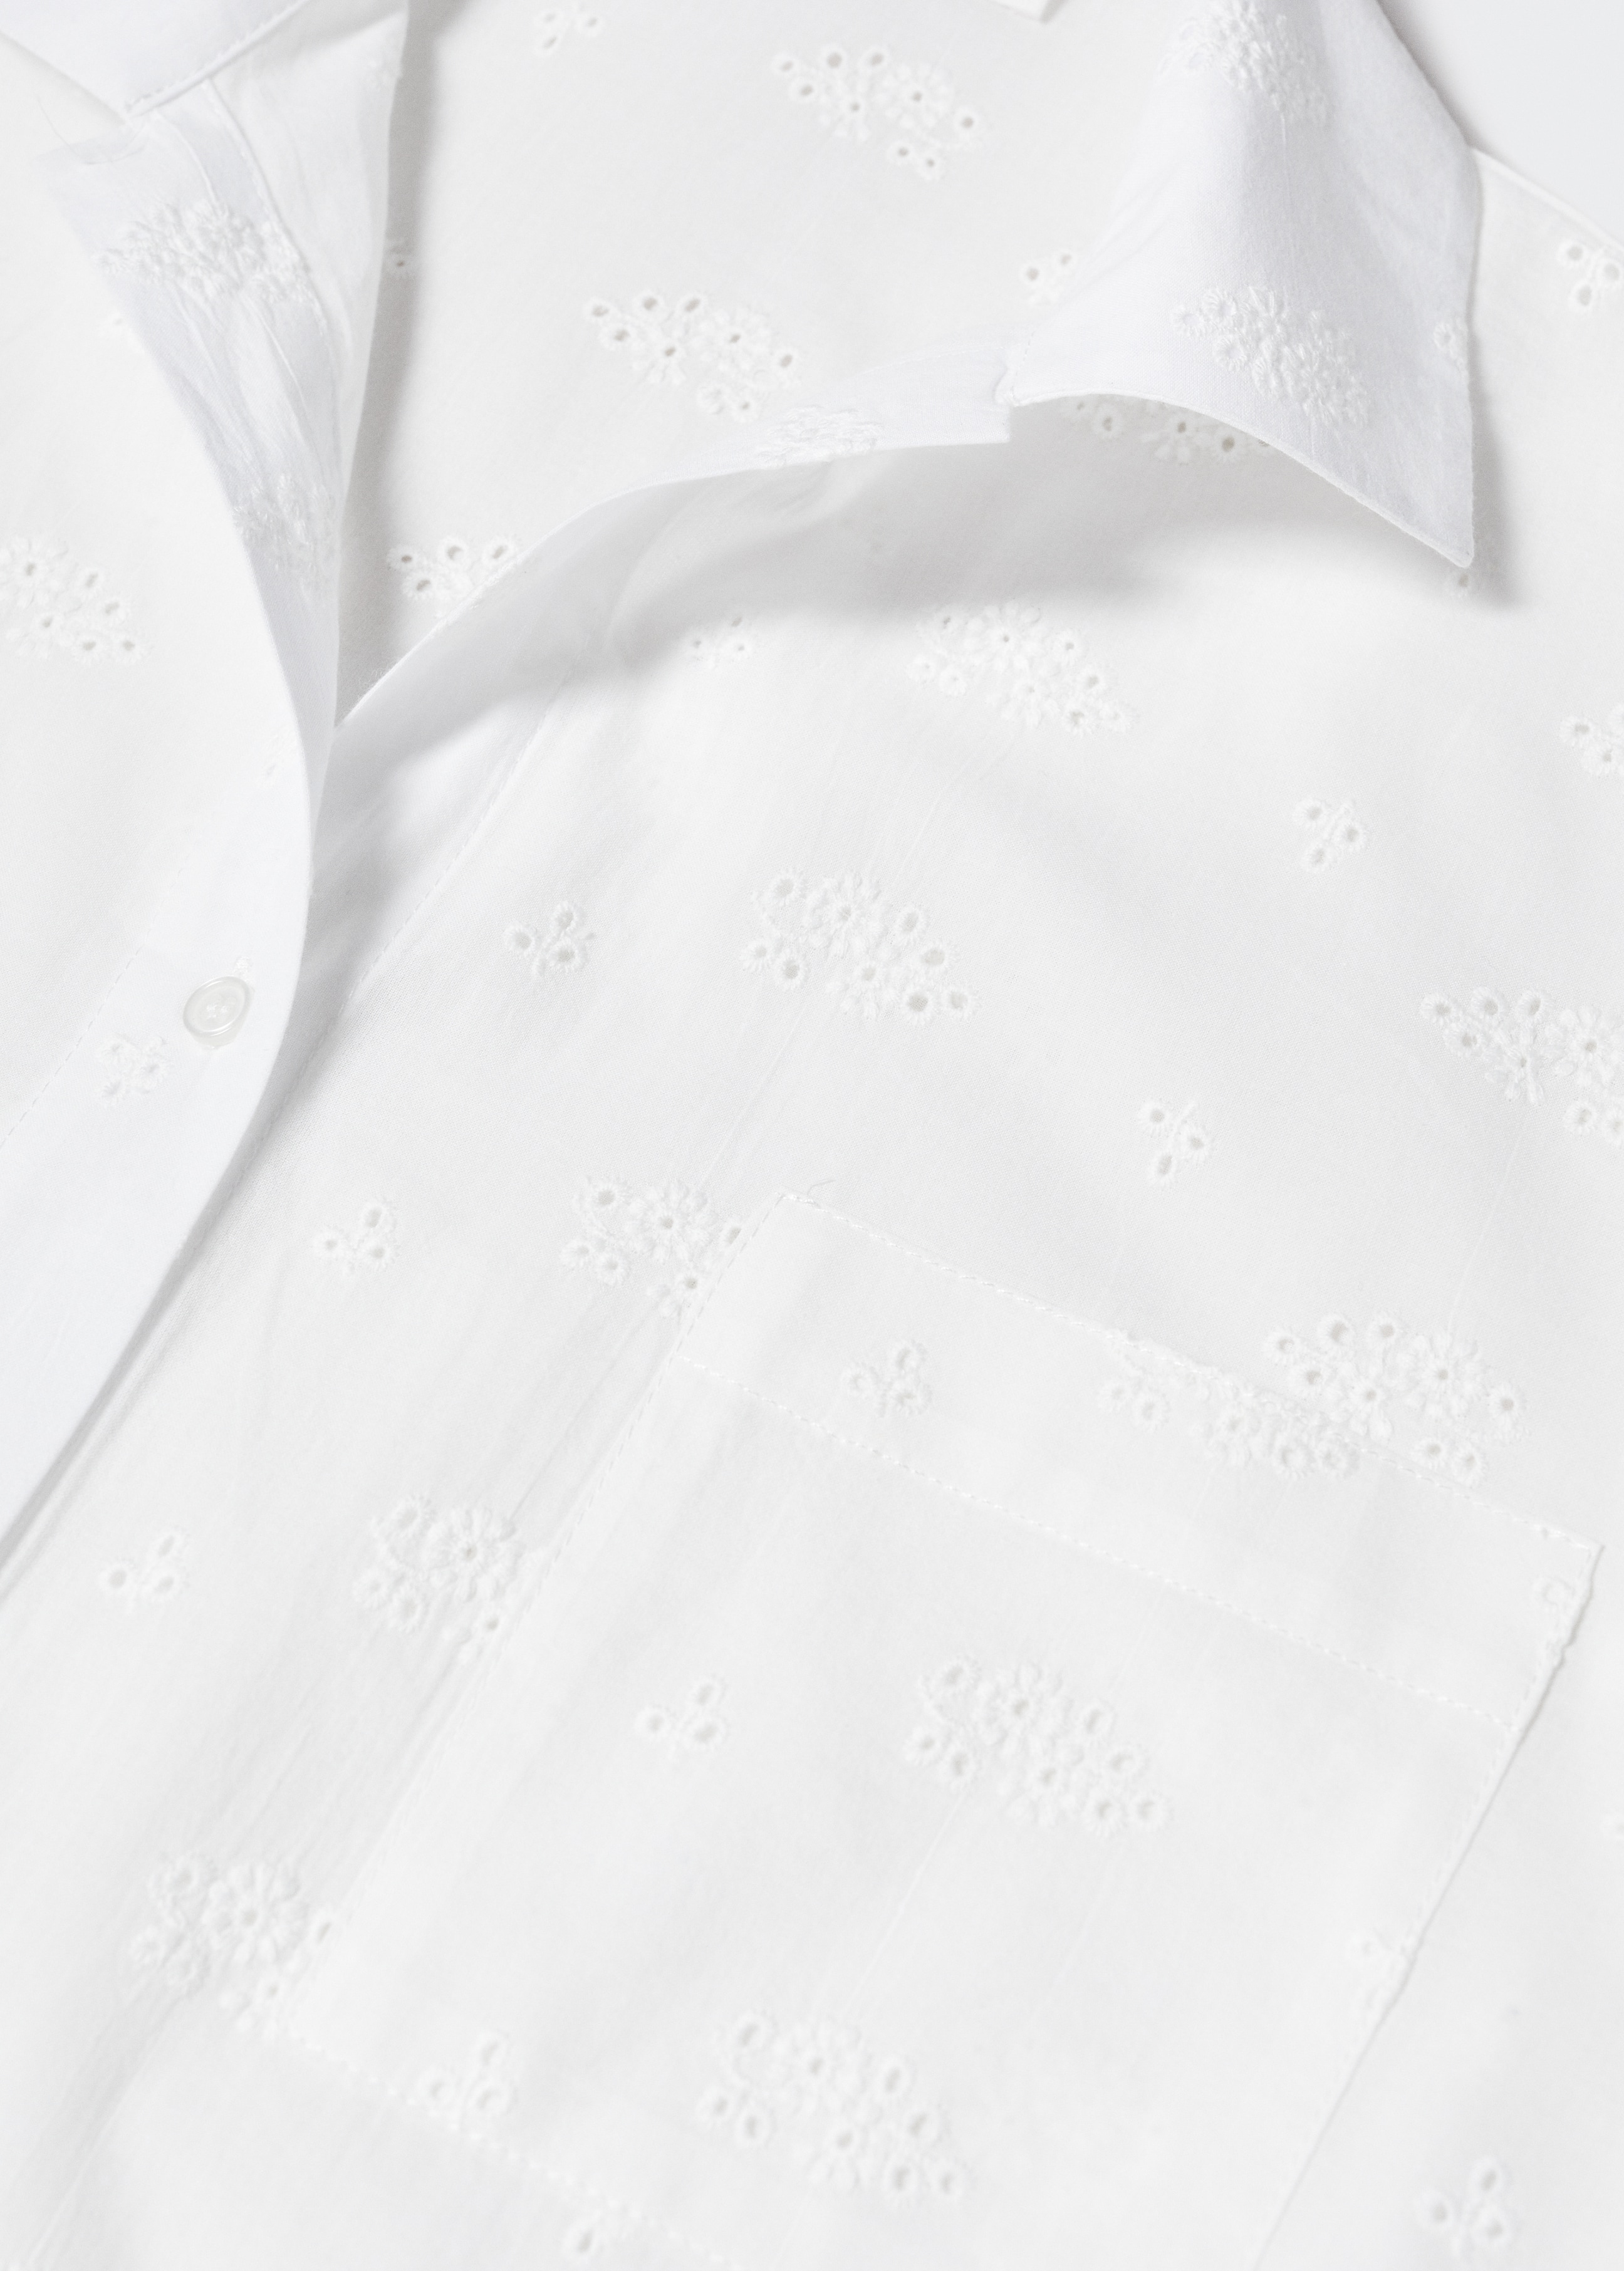 Pyjama shirt with openwork details - Details of the article 8